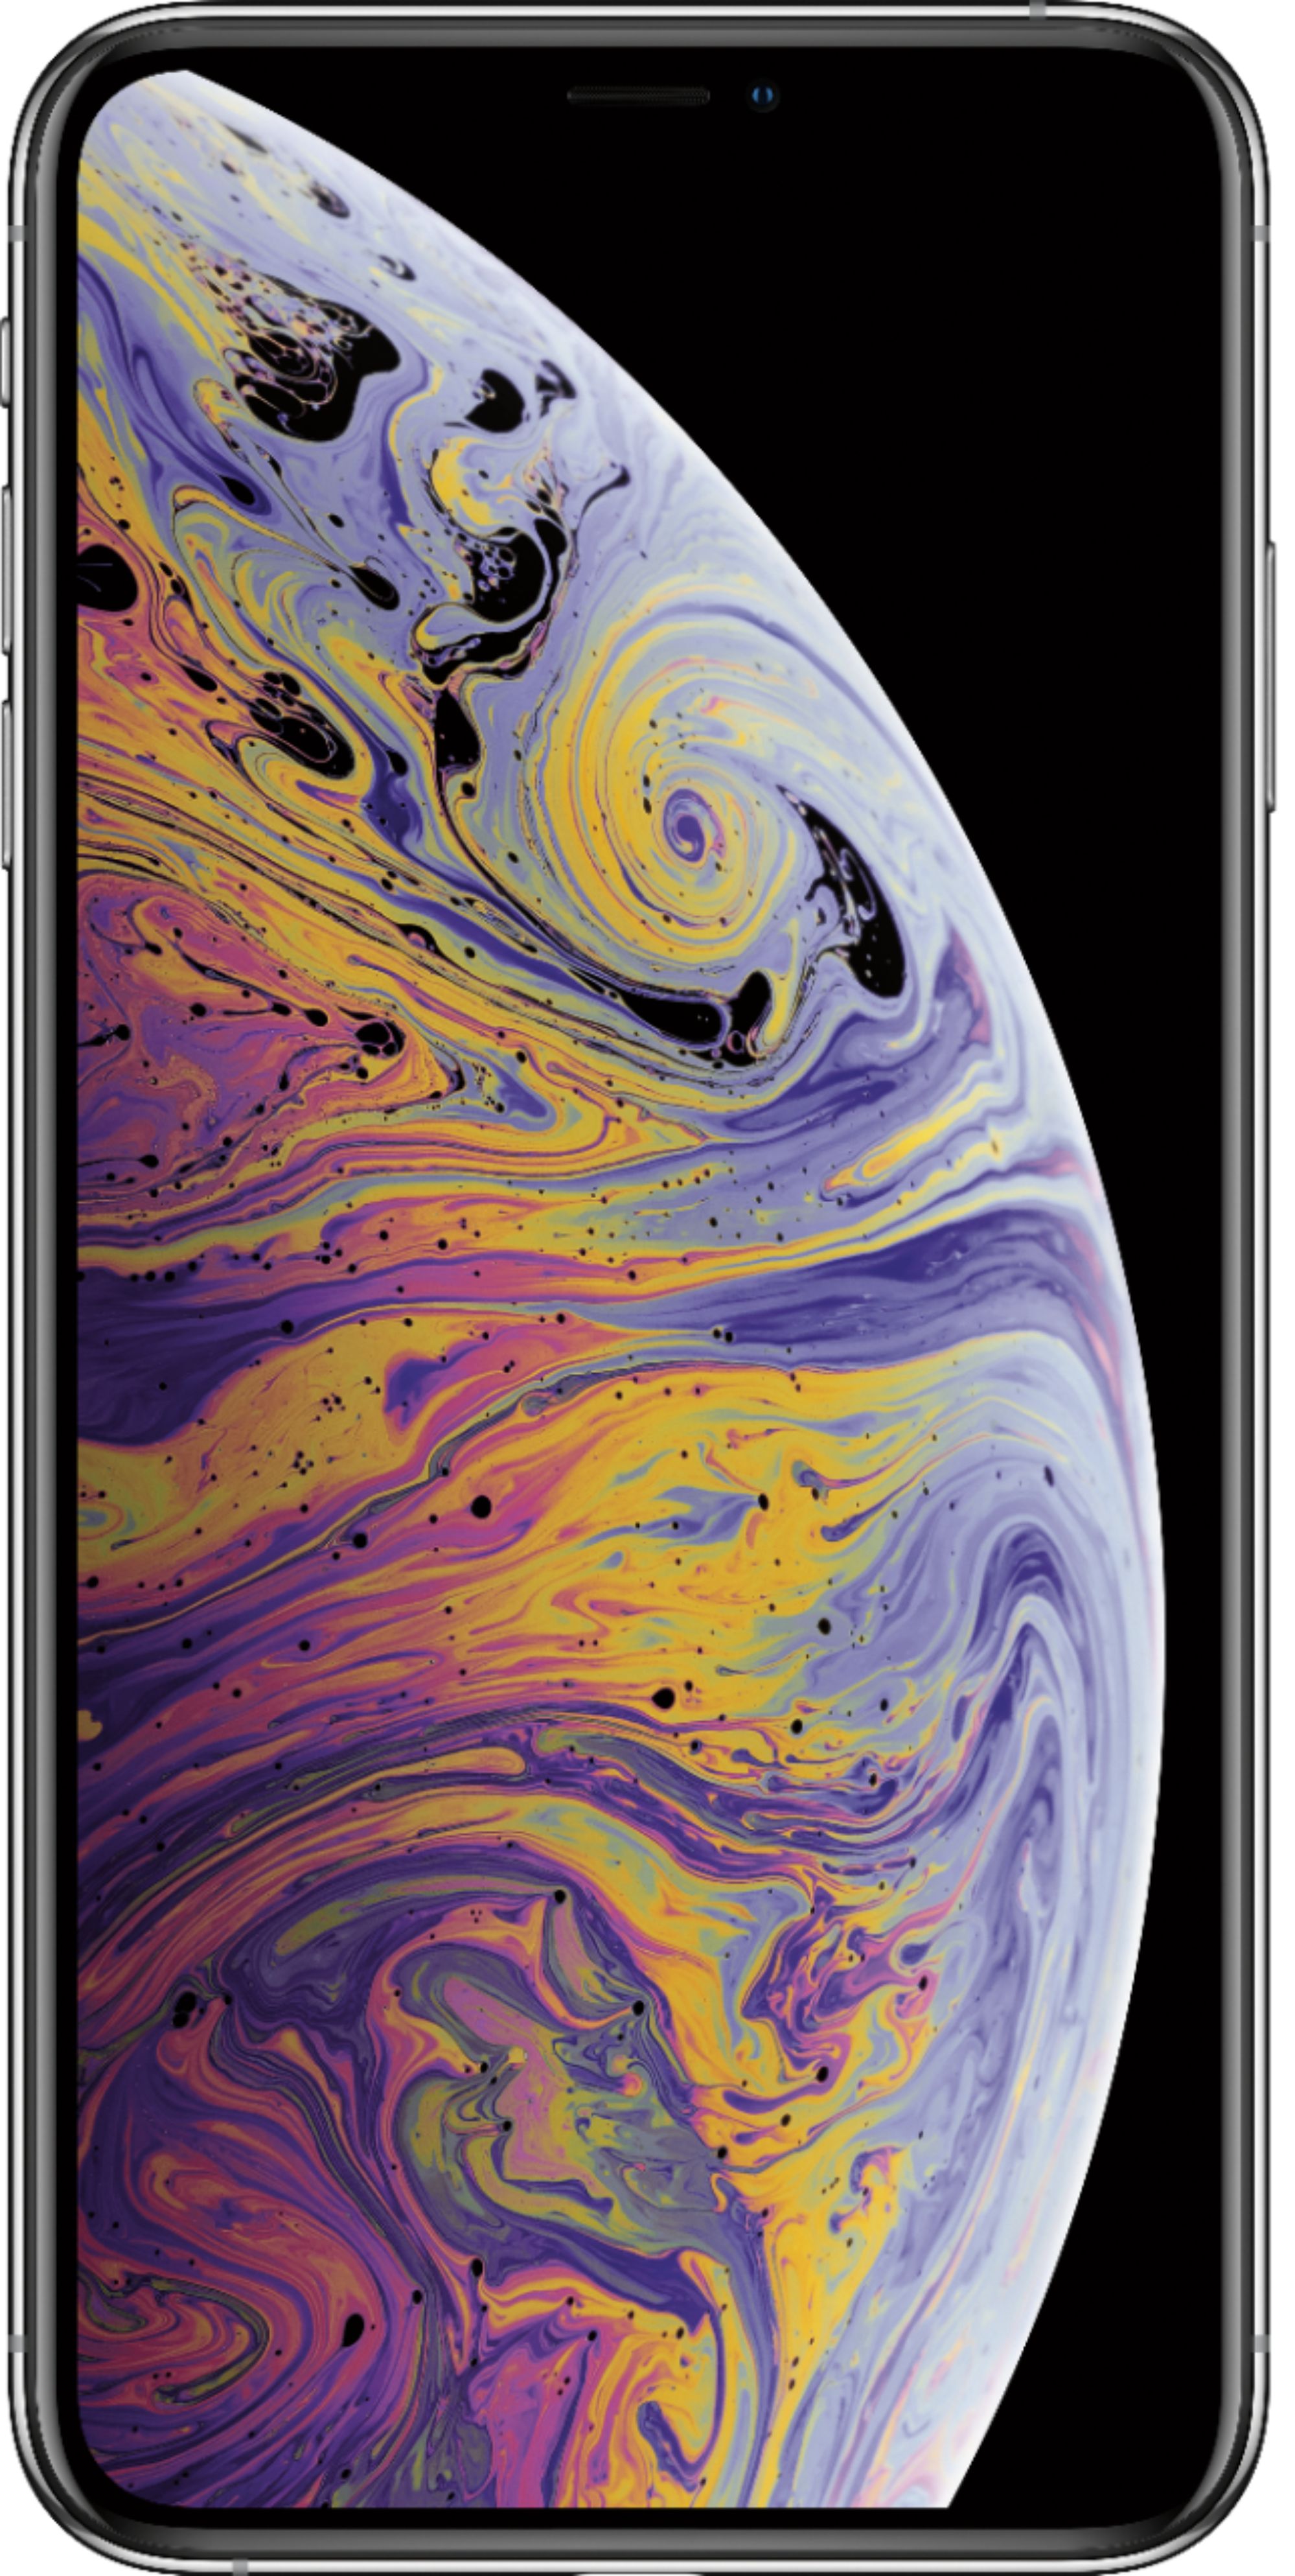 Apple iPhone XS Max 64GB Silver (AT&T) MT5A2LL/A - Best Buy